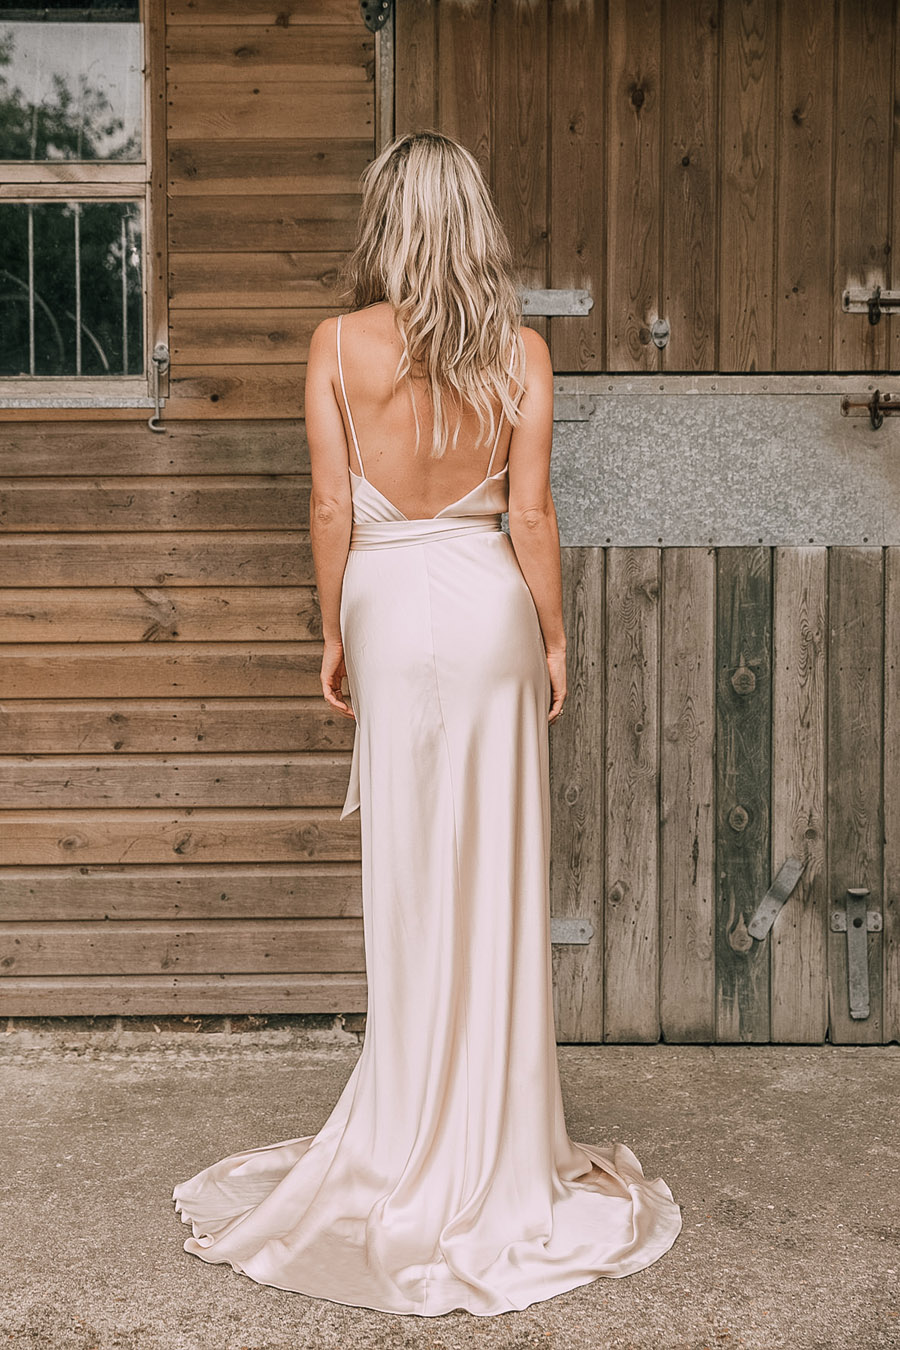 Belle and Bunty cowgirl wedding dress collection 2019 London (7)